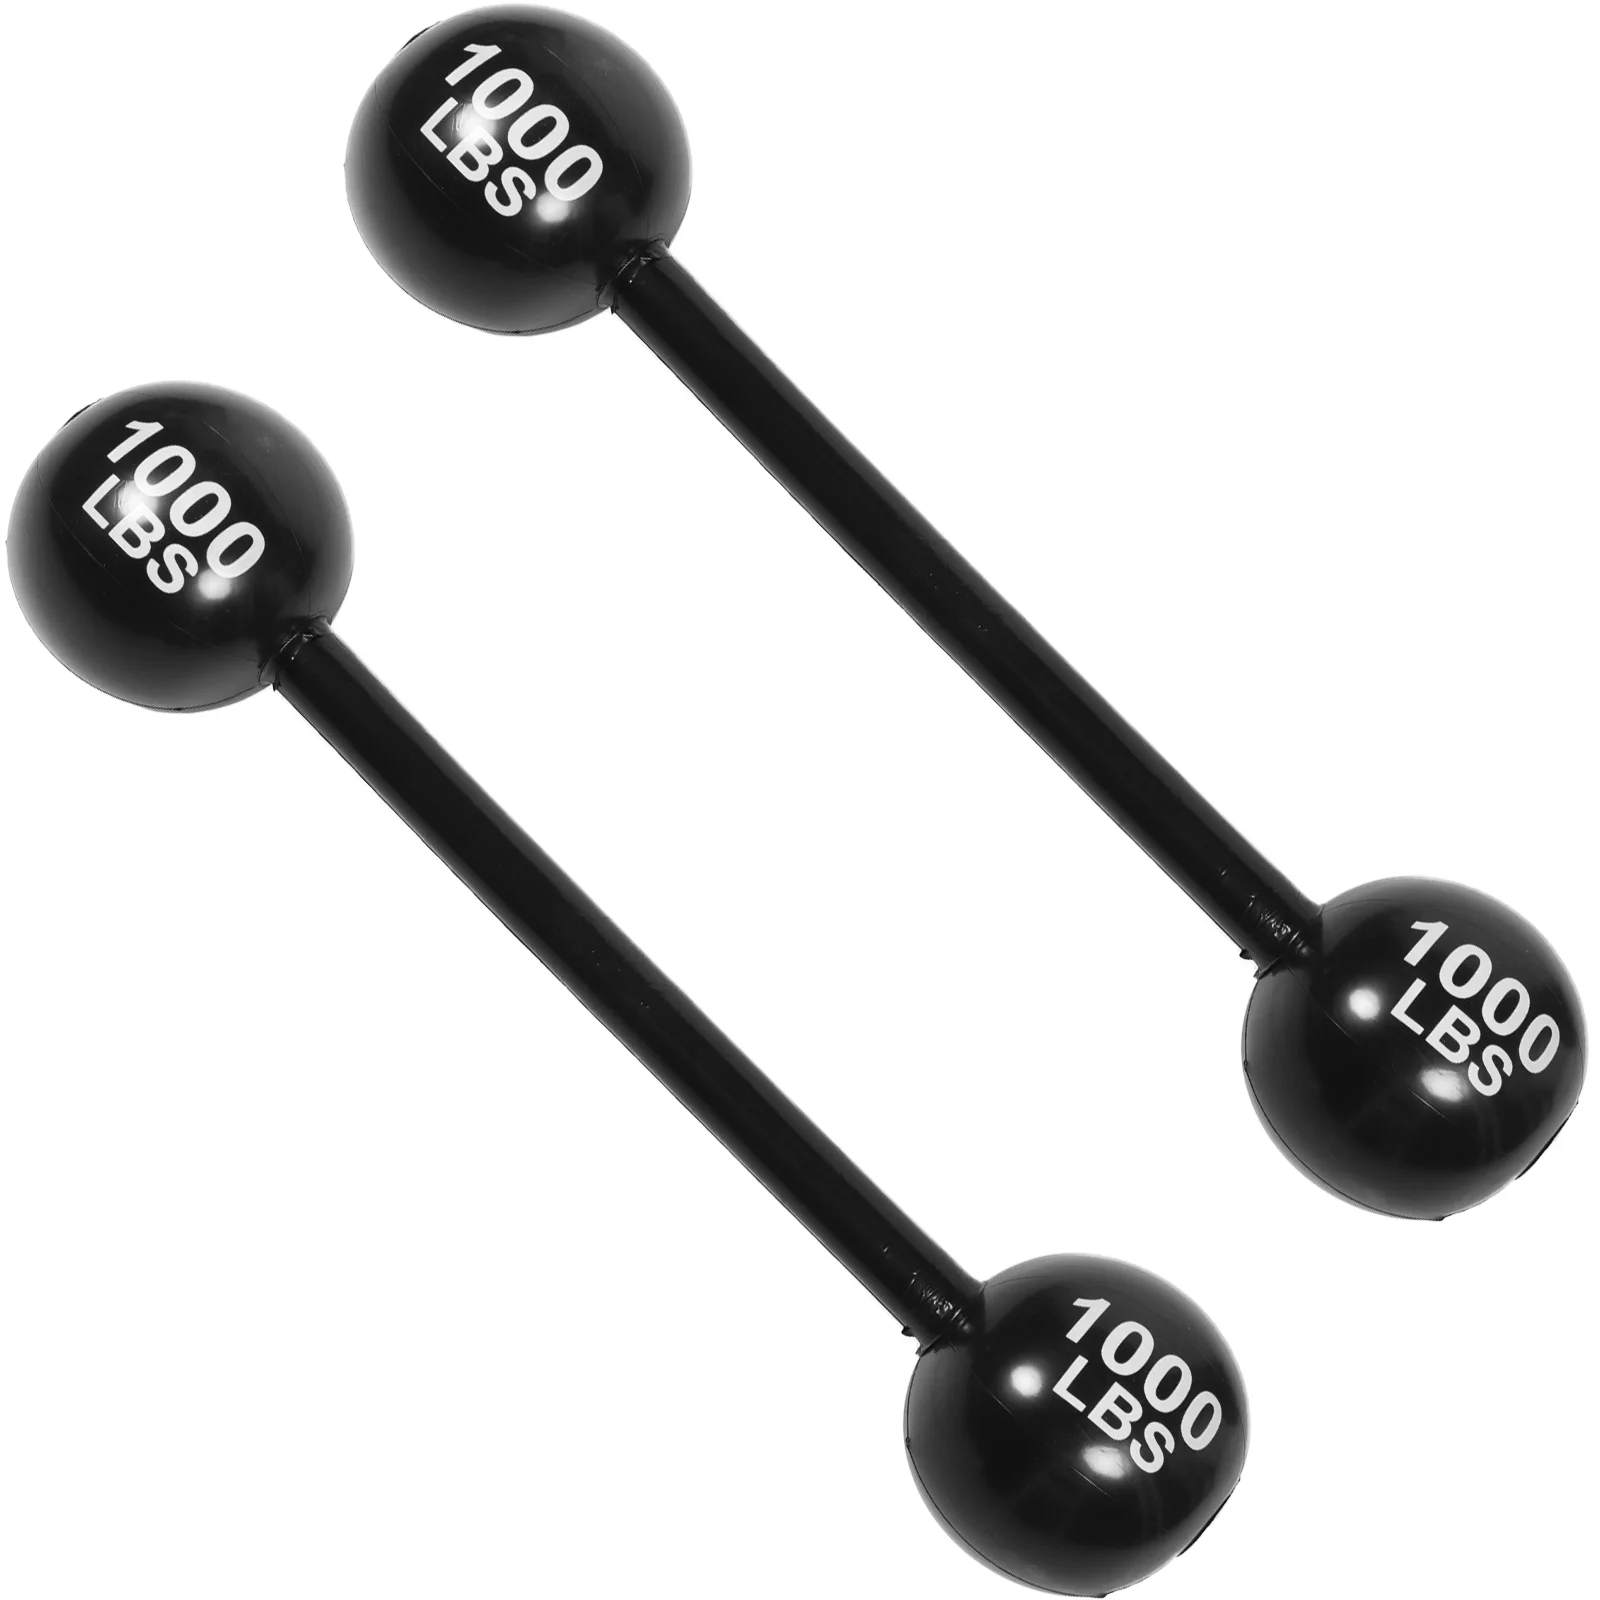 2PCS Barbell Dumbbell Strongman Costume Toys Carnival Circus Photo Prop Decoration Weights for Kids Adults Fancy Dress 2pcs kids dumbbells children dumbbells dumbbell prop party photo props strongman costume